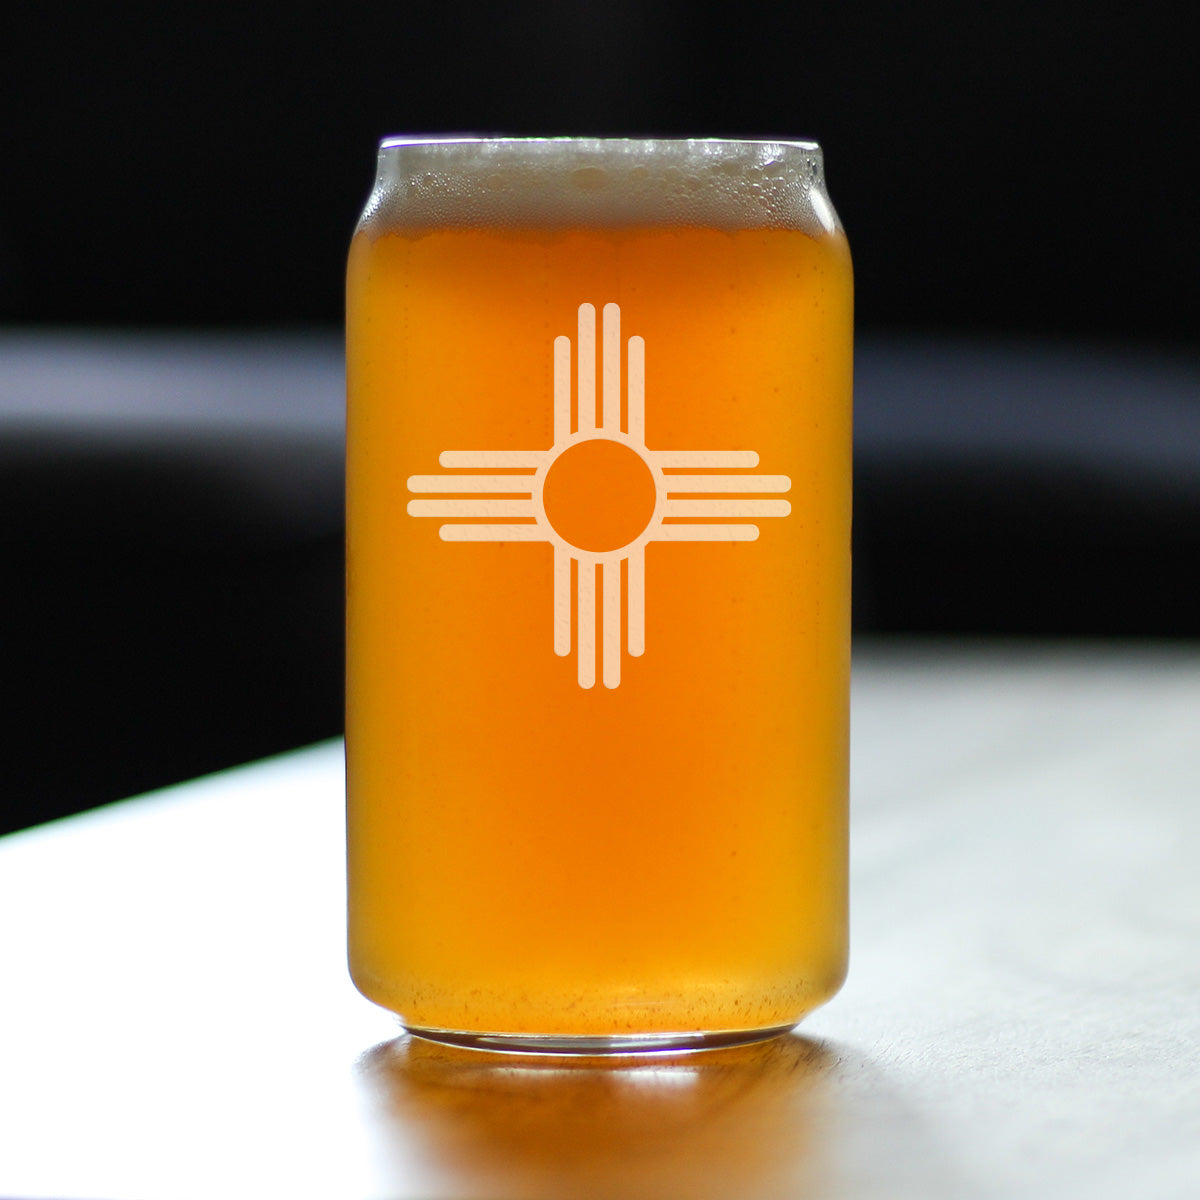 New Mexico Flag Beer Can Pint Glass - State Themed Drinking Decor and Gifts for New Mexican Women &amp; Men - 16 Oz Glasses